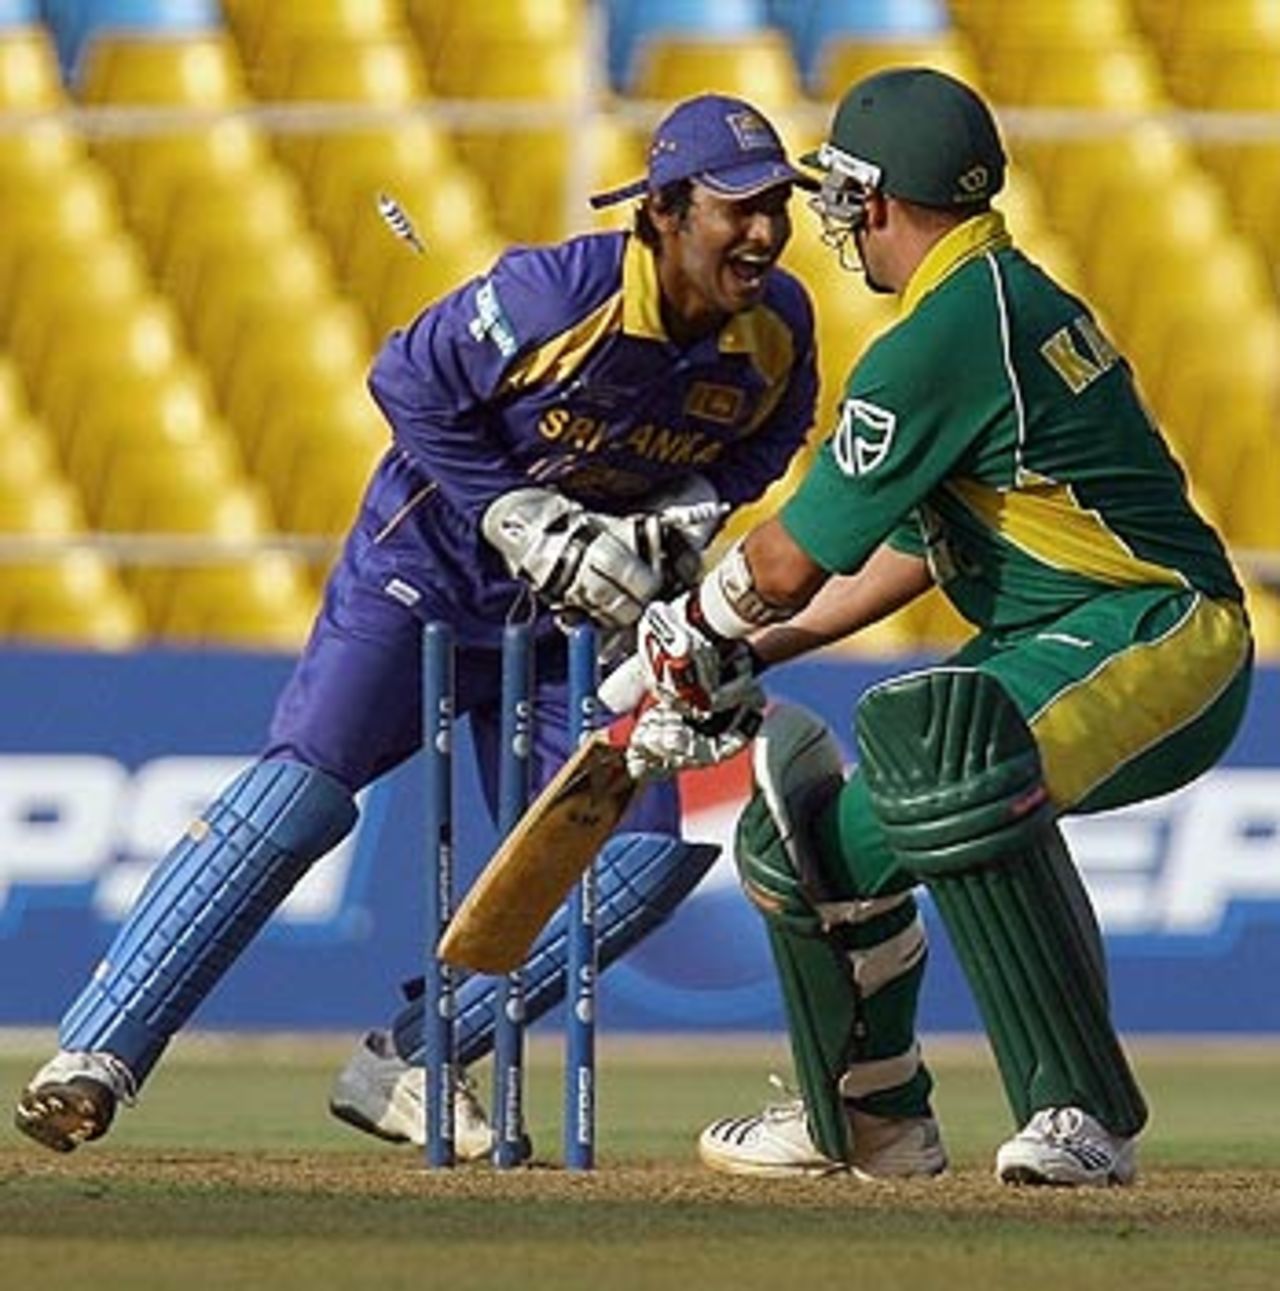 Jacques Kallis strays out of his crease and Kumar Sangakkara does the rest, South Africa v Sri Lanka, 7th match, Champions Trophy, Ahmedabad, October 24, 2006